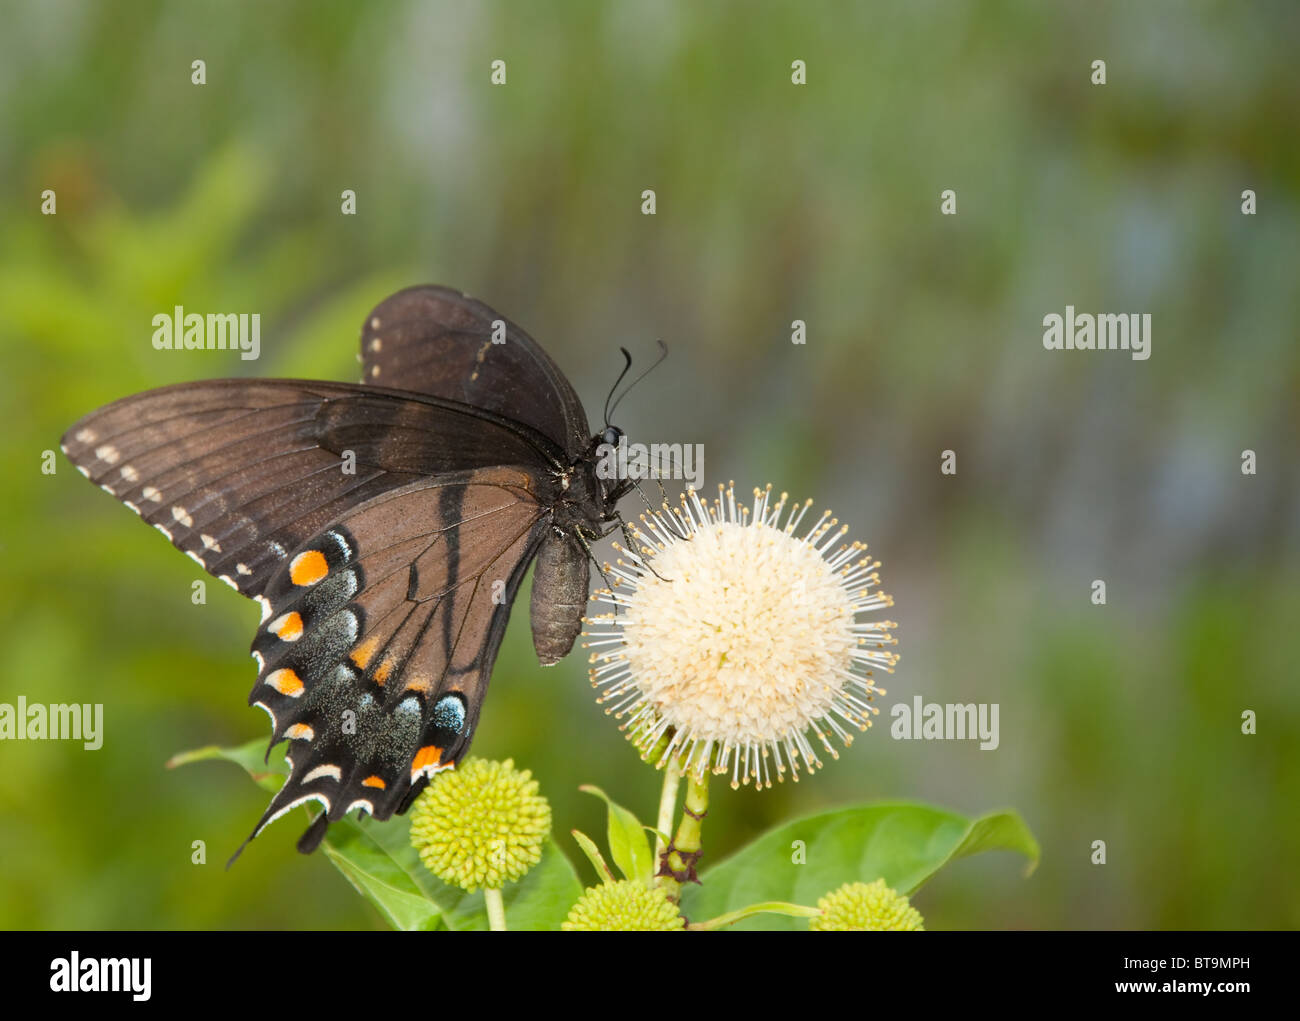 A black morph of an Eastern tiger swallowtail butterfly feeding on a Buttonbush Stock Photo